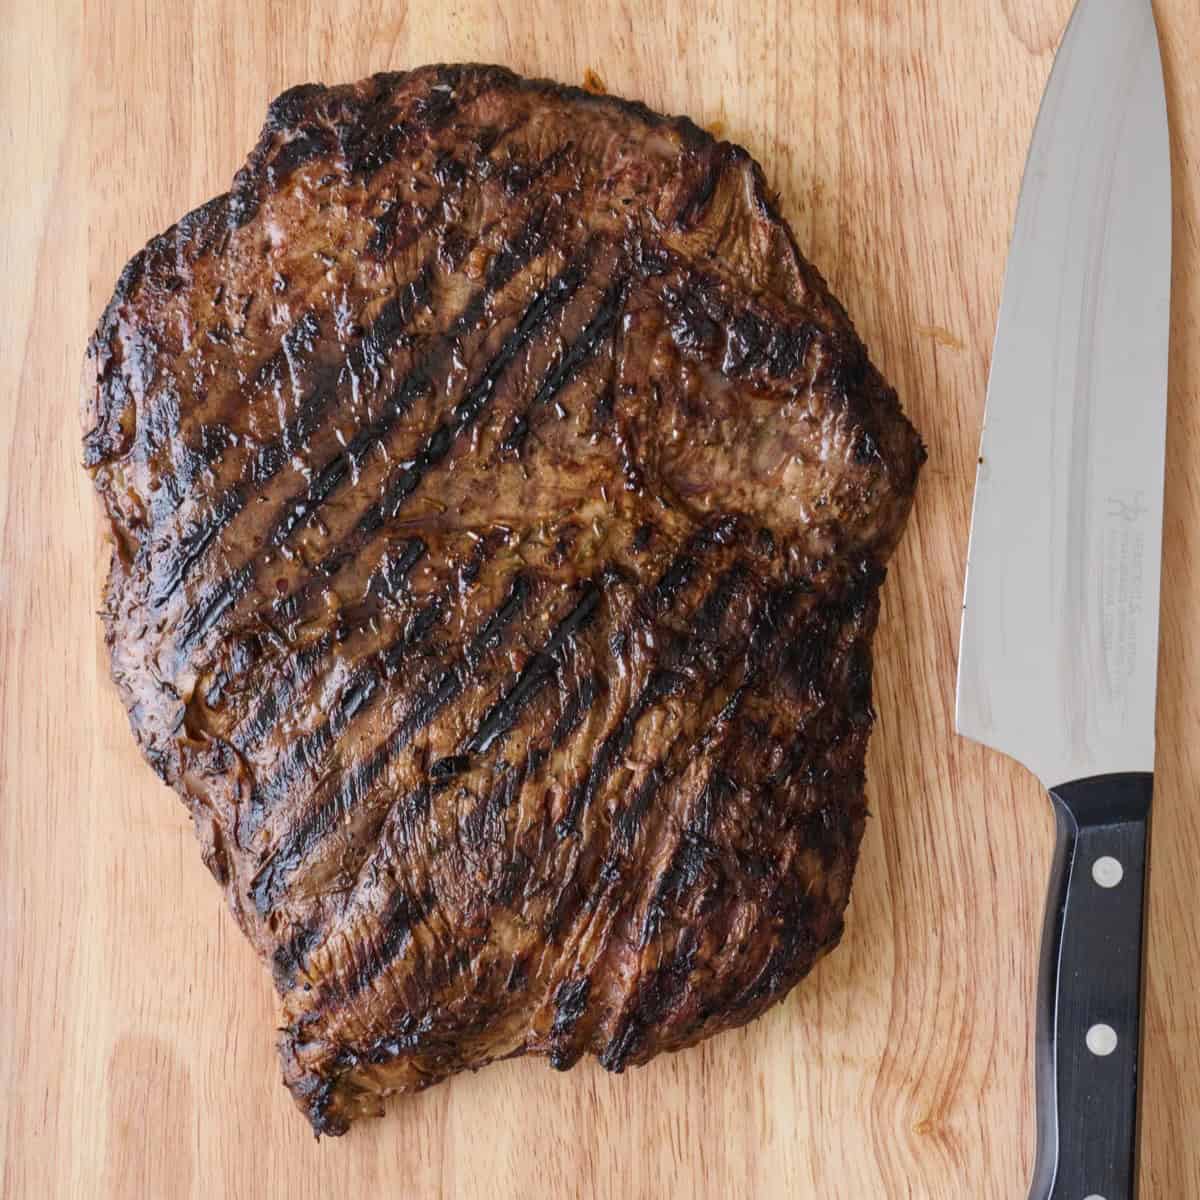 Grilled flank steak on a cutting board with a chef's knife.